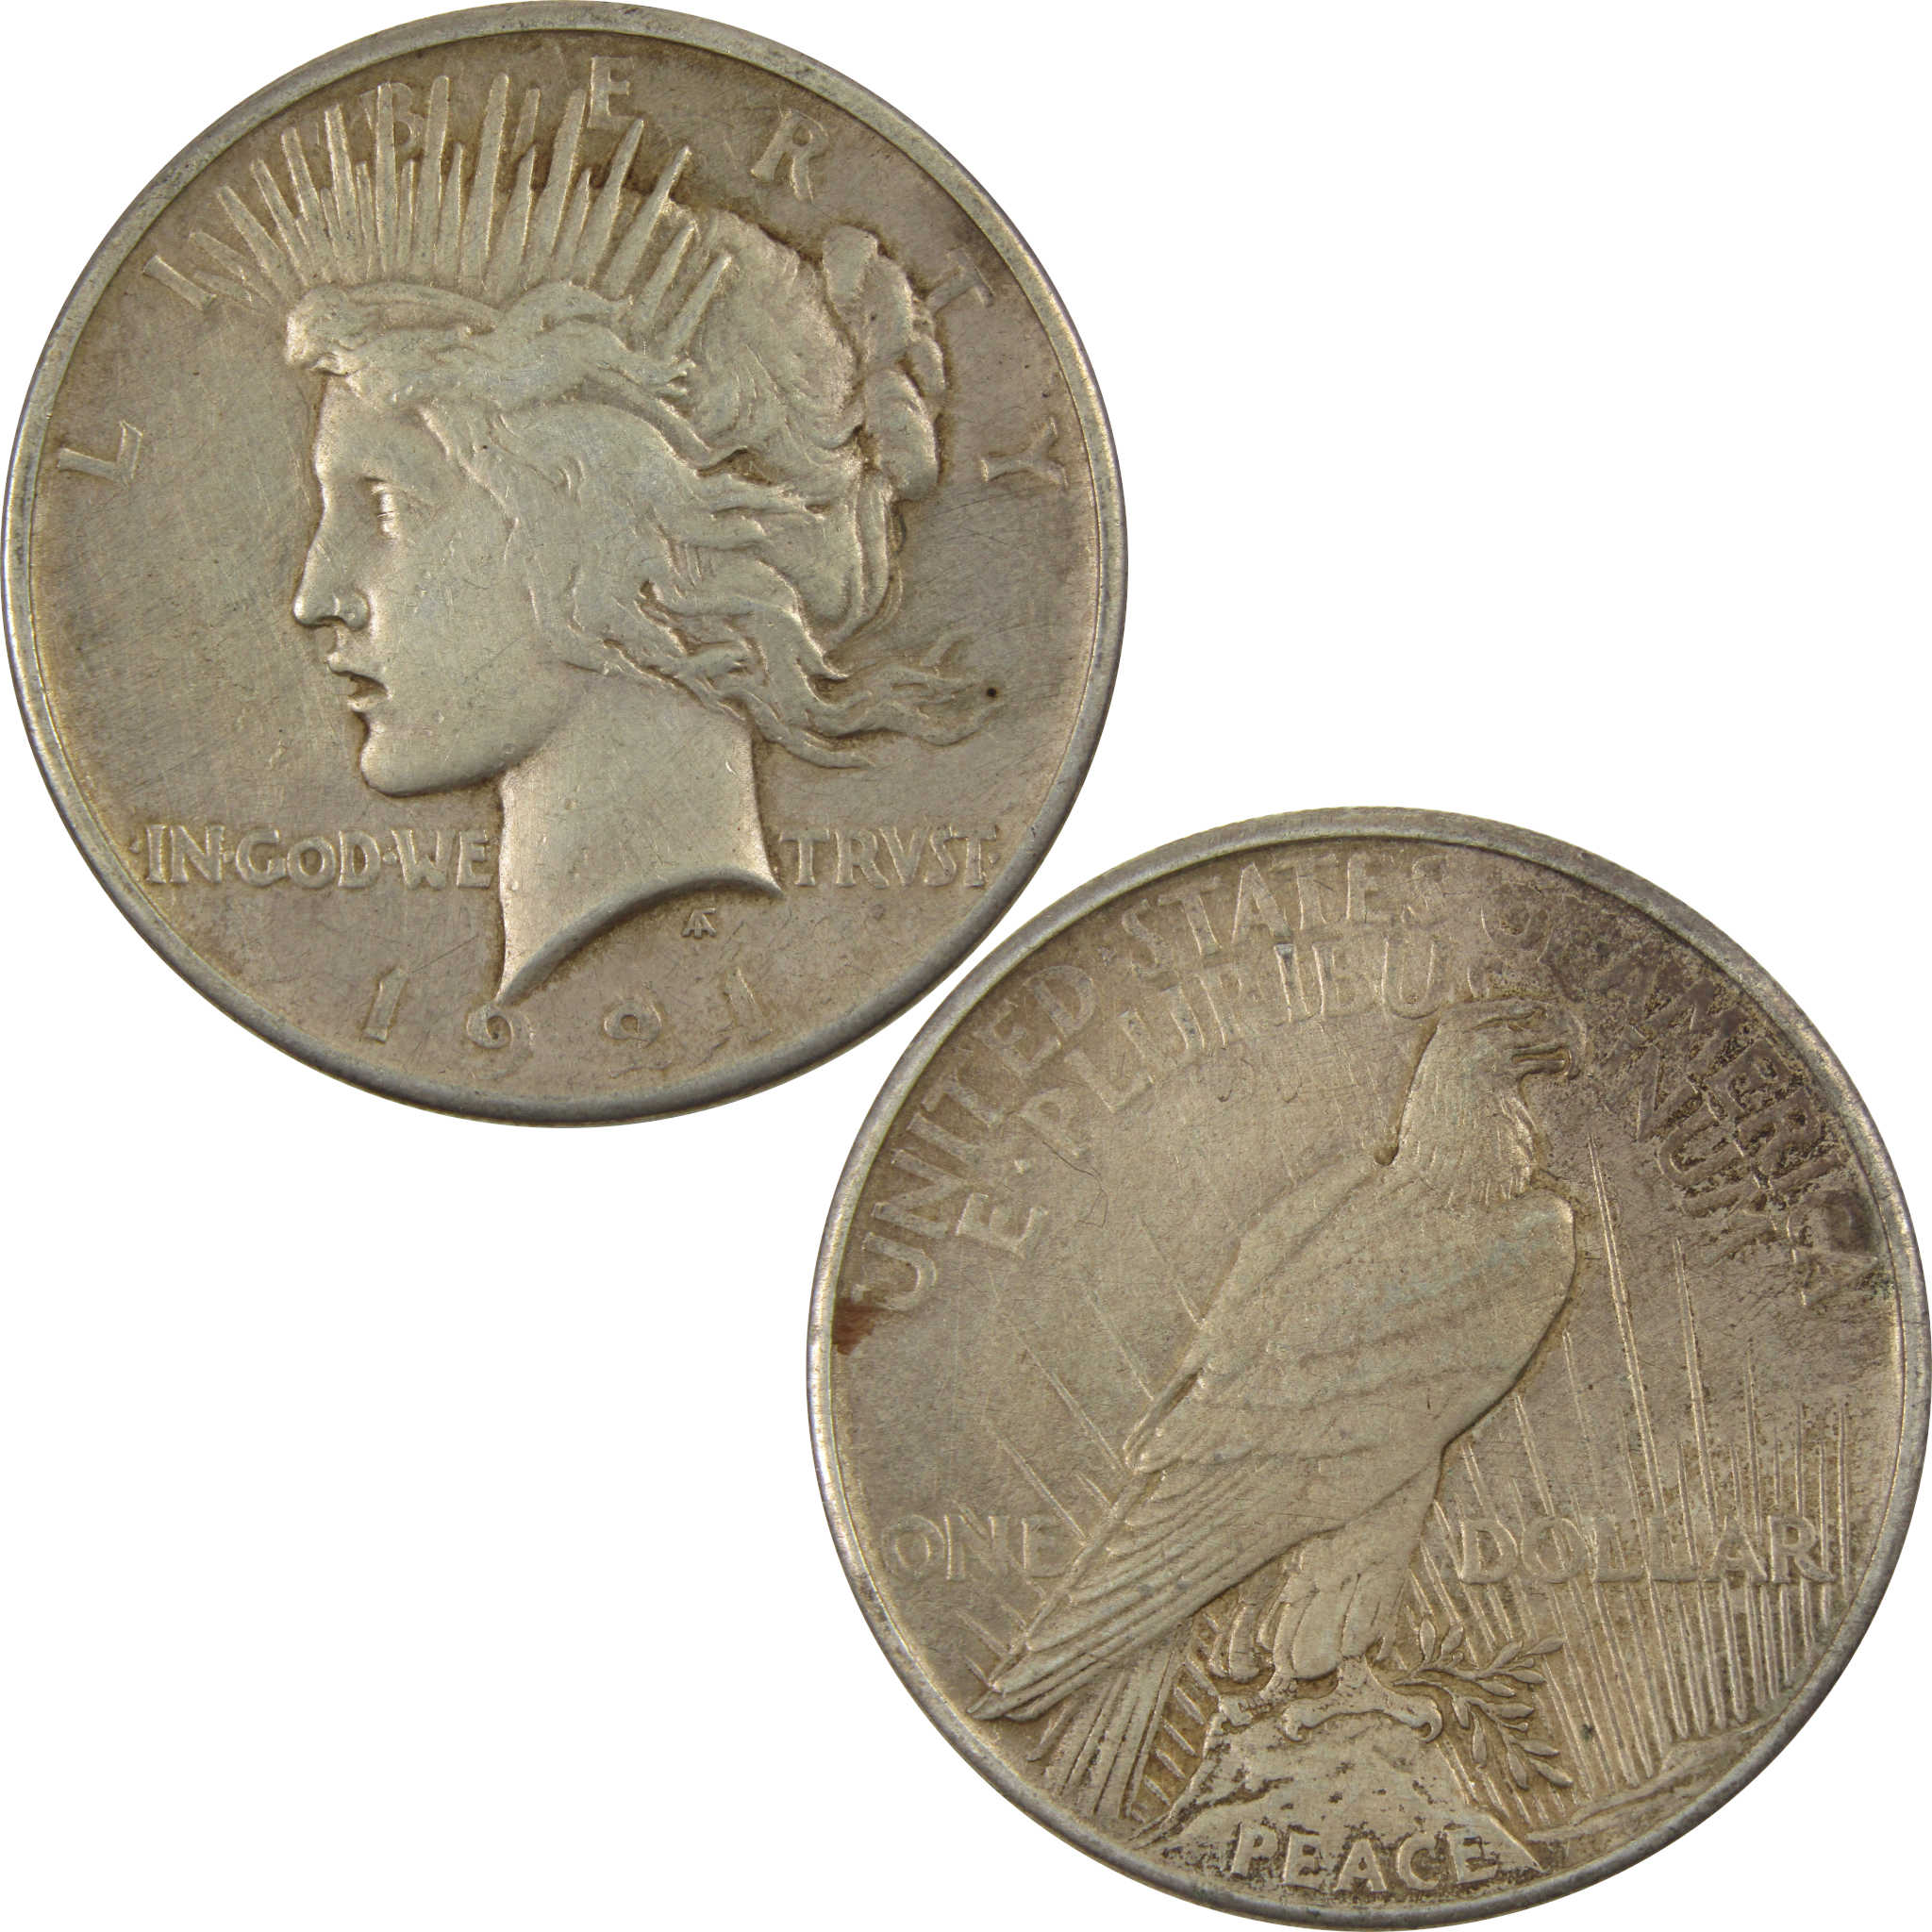 1921 High Relief Peace Dollar XF Details 90% Silver $1 Coin SKU:I4372